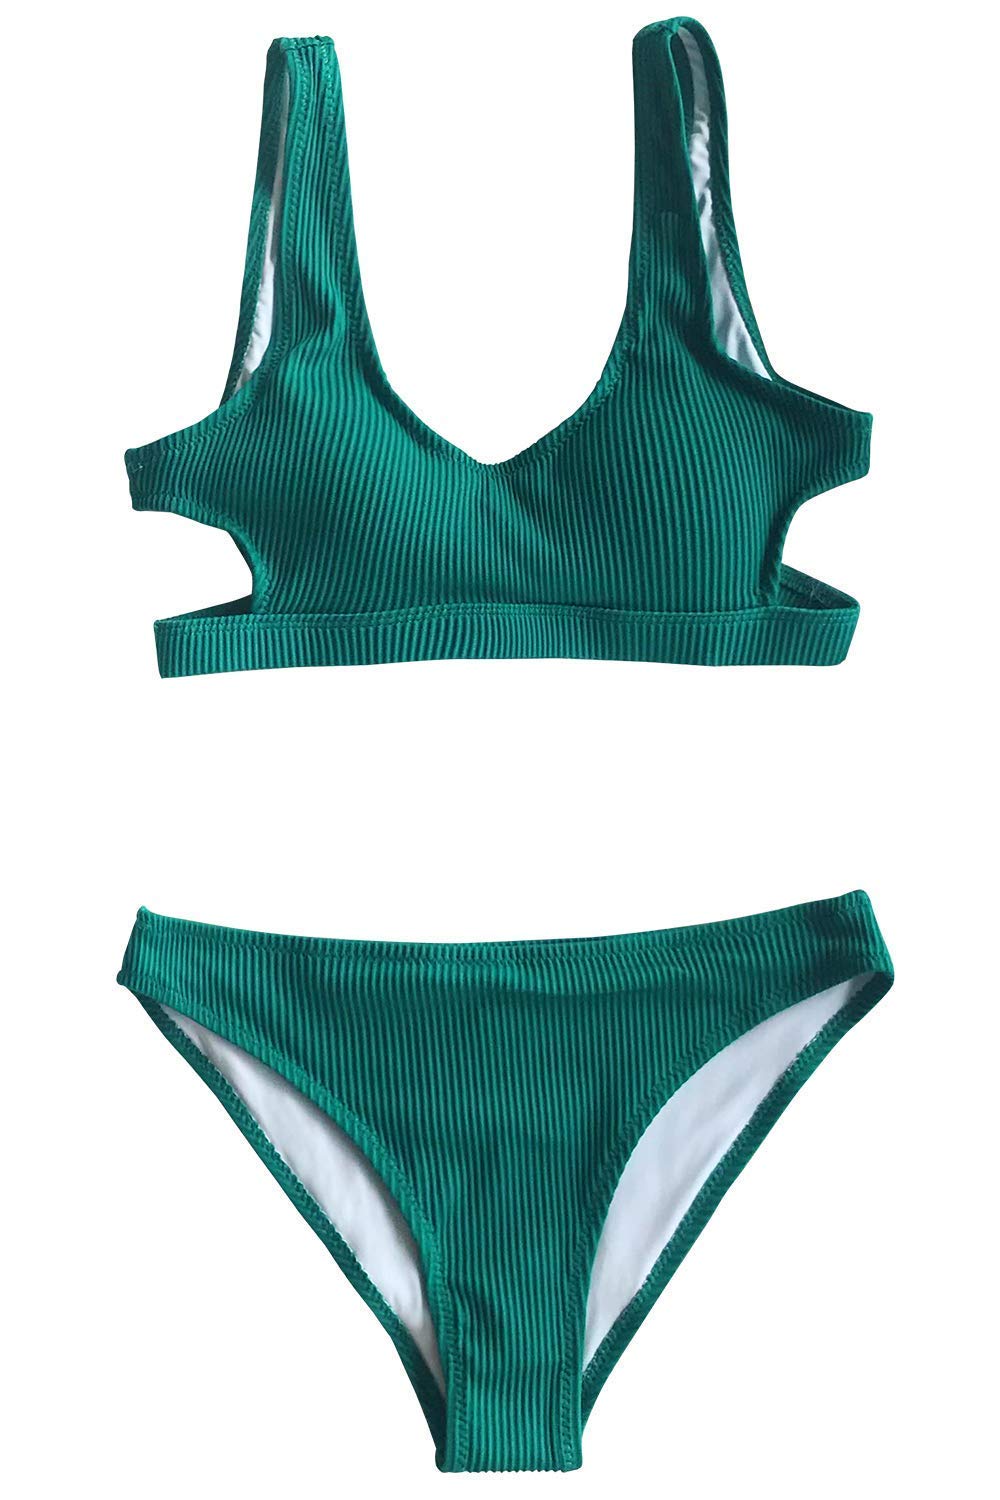 CUPSHE Women's Emerald Velvet Solid Backless Bikini with Cutout